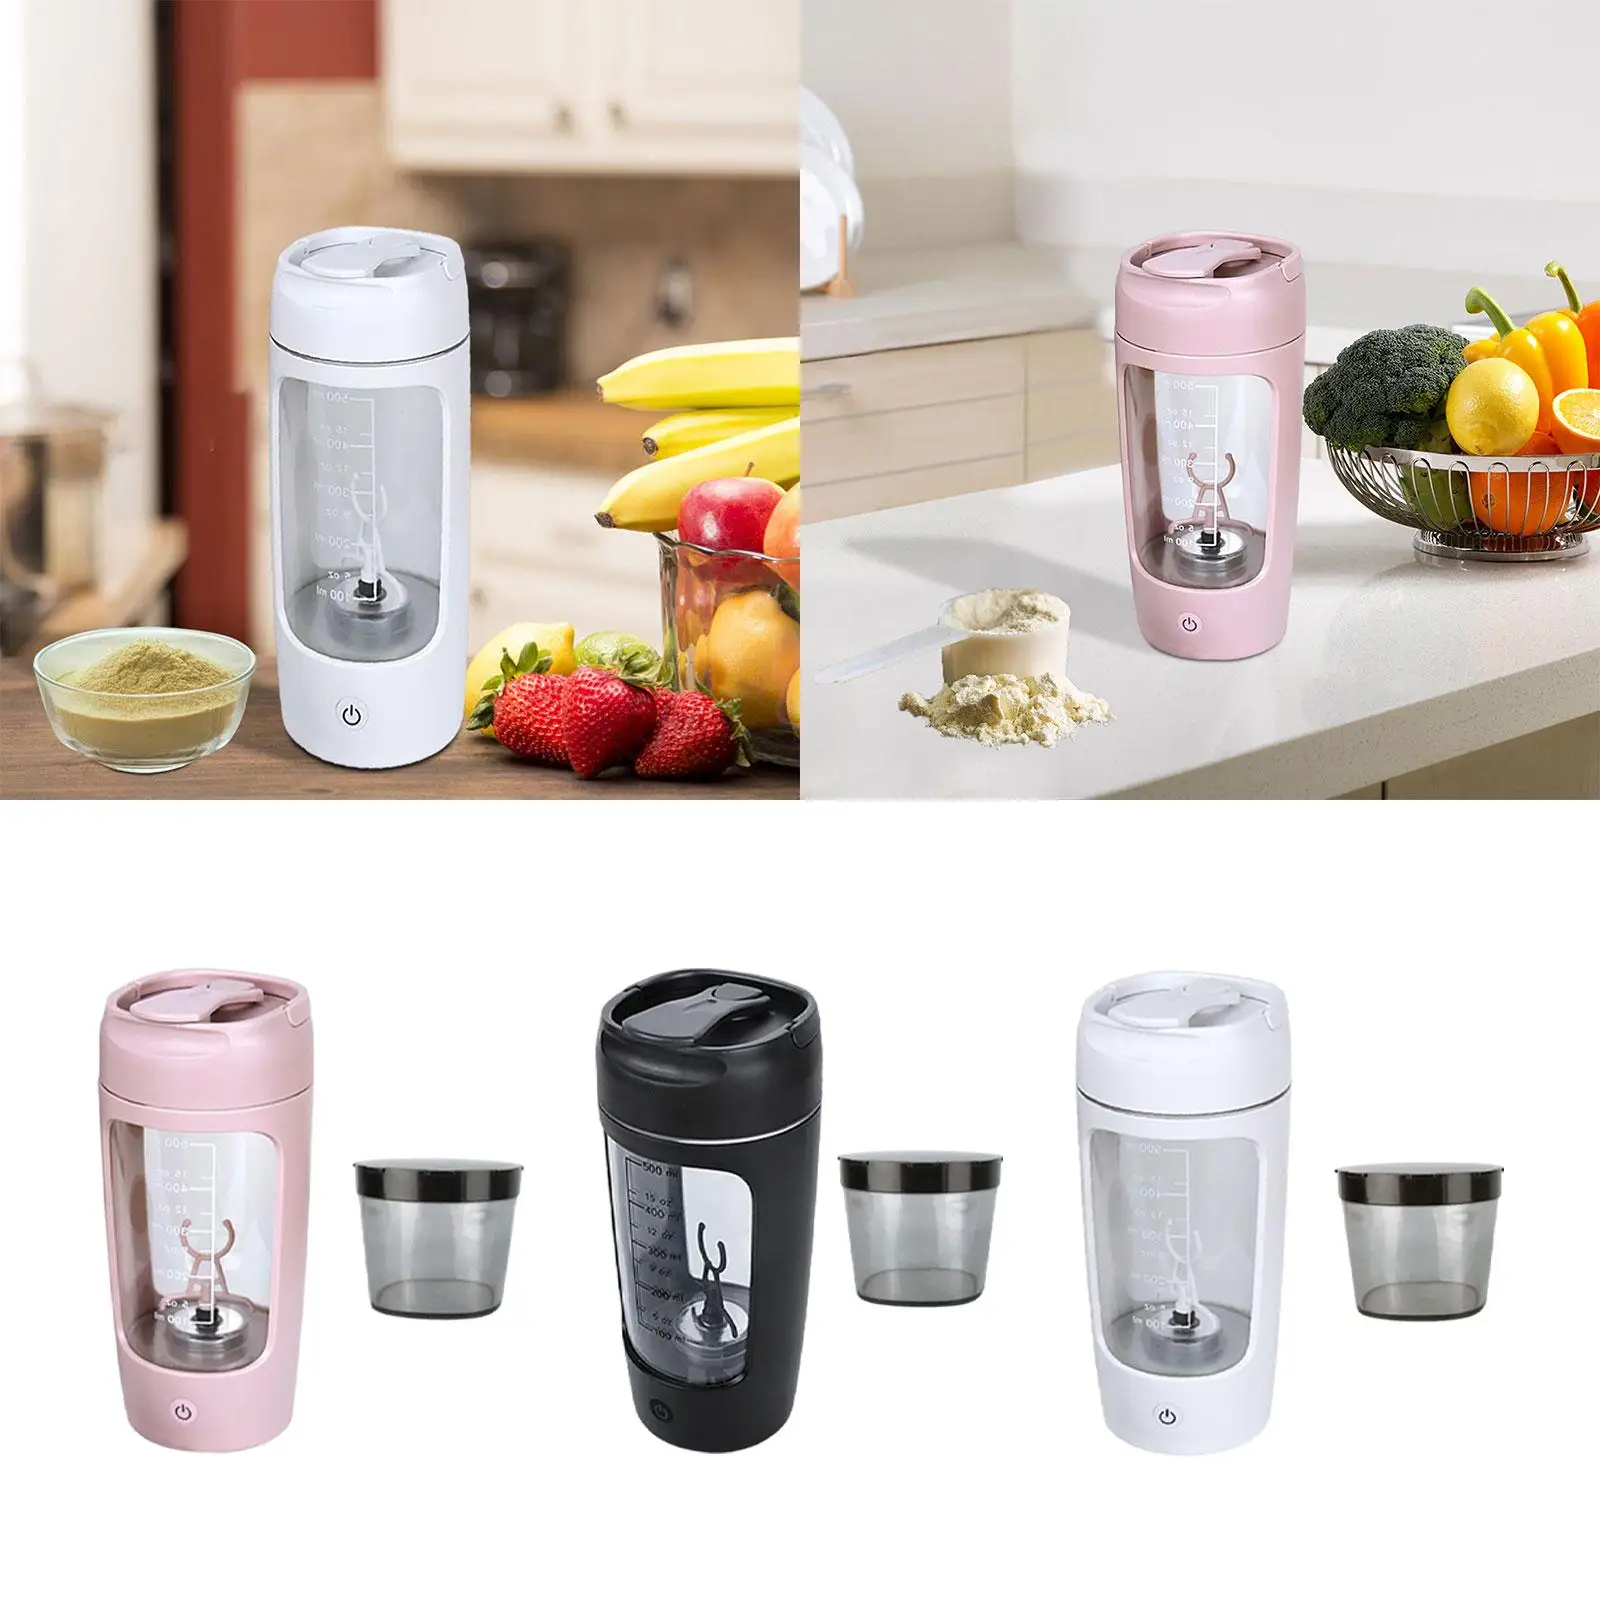 https://ae01.alicdn.com/kf/S1a4e4c2f3b76488fb55e8a86d88928a4S/650ML-USB-Rechargeable-Electric-Mixing-Portable-Protein-Shaker-Bottle-Mixer-For-Travel-Home-Office.jpg